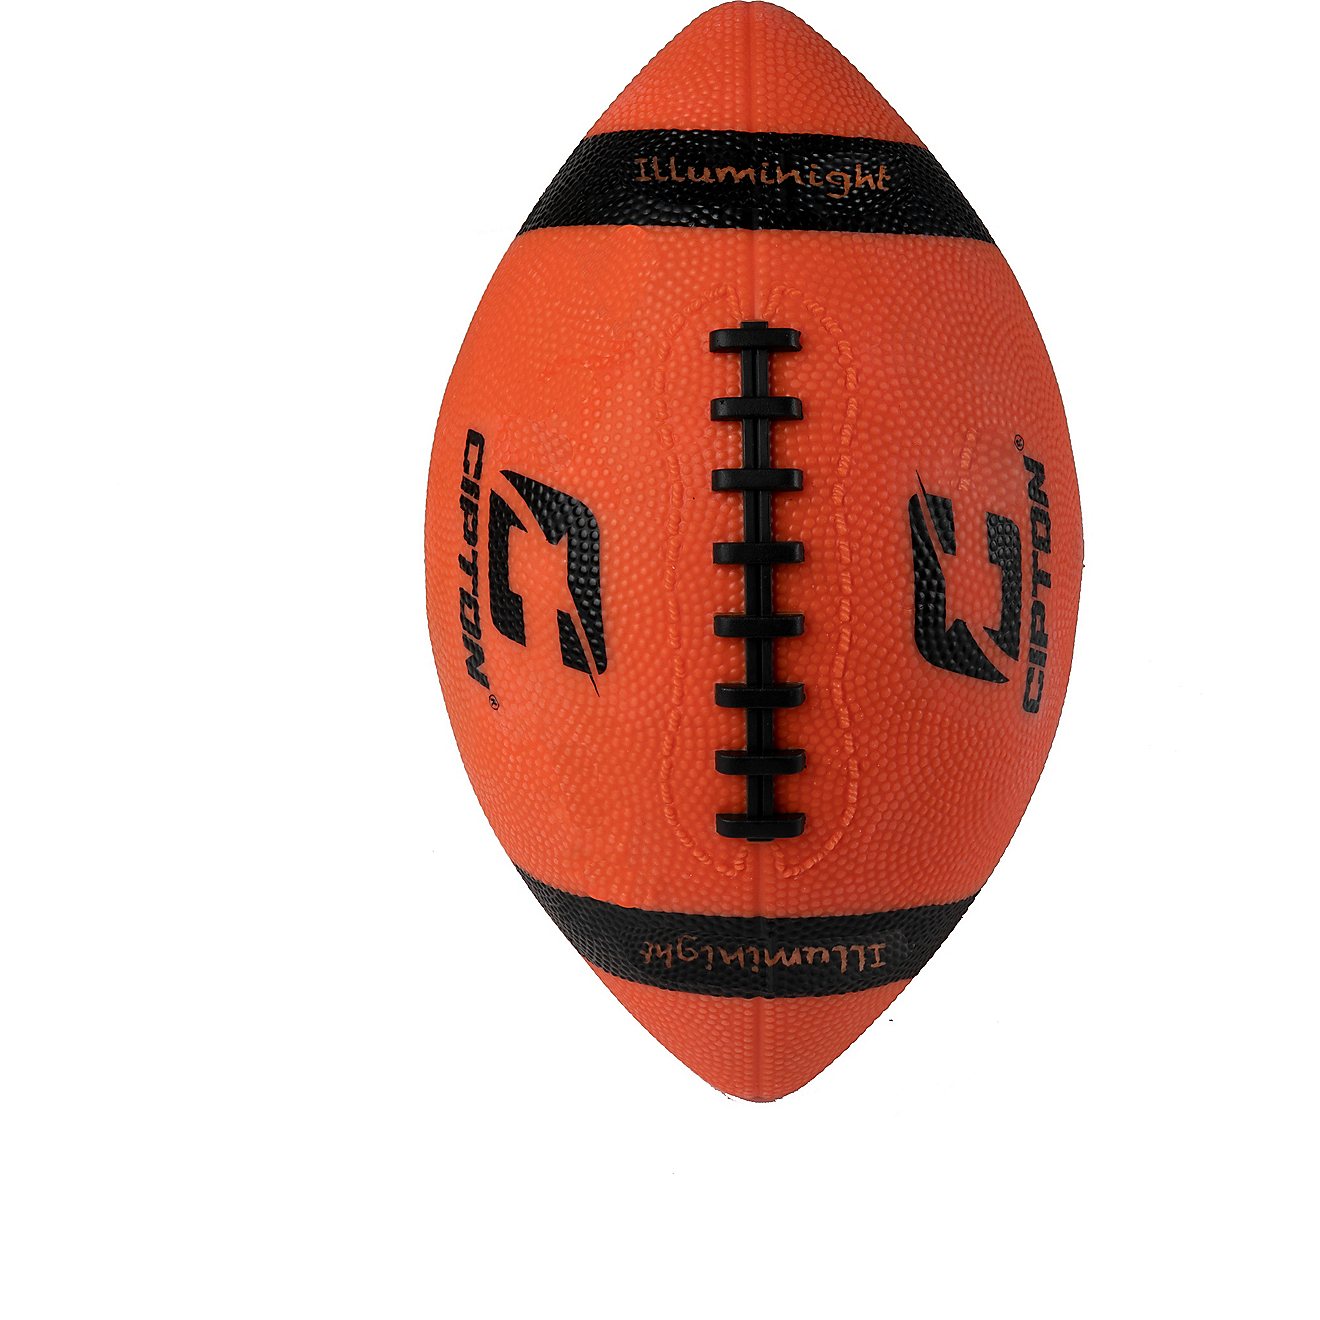 Cipton Light-Up LED Rubber Official Football                                                                                     - view number 2